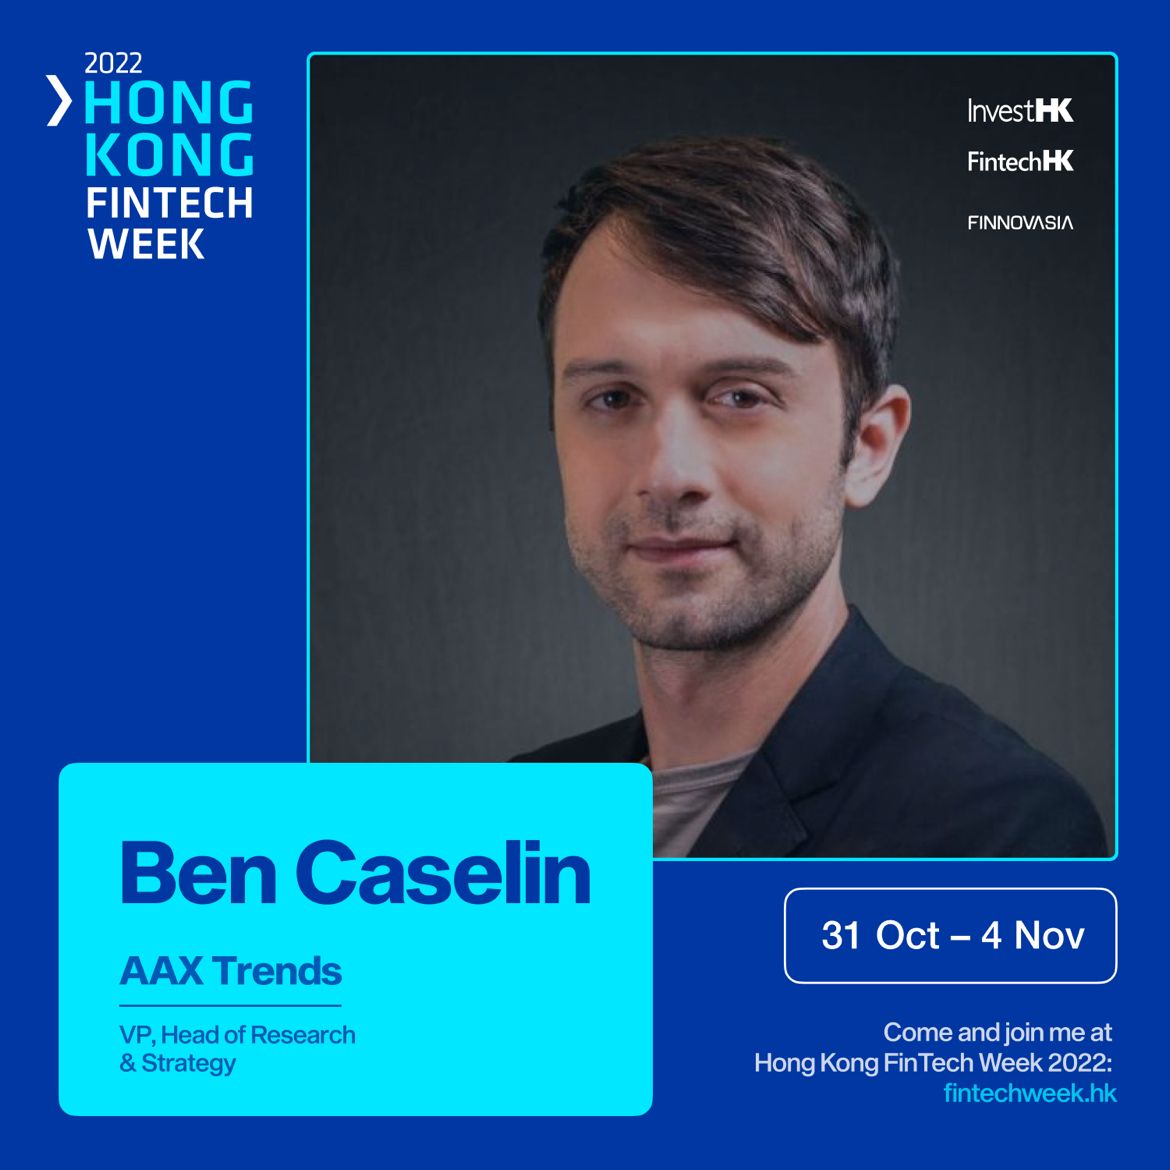 The Hong Kong FinTech Week is coming soon! 🥳 We are grateful to announce that our VP and Head of Research and Strategy @BenCaselin will be speaking on behalf of #AAXTrends. He will discuss the role of digital assets in a fiat world.💰 We are looking forward to seeing you in HK!